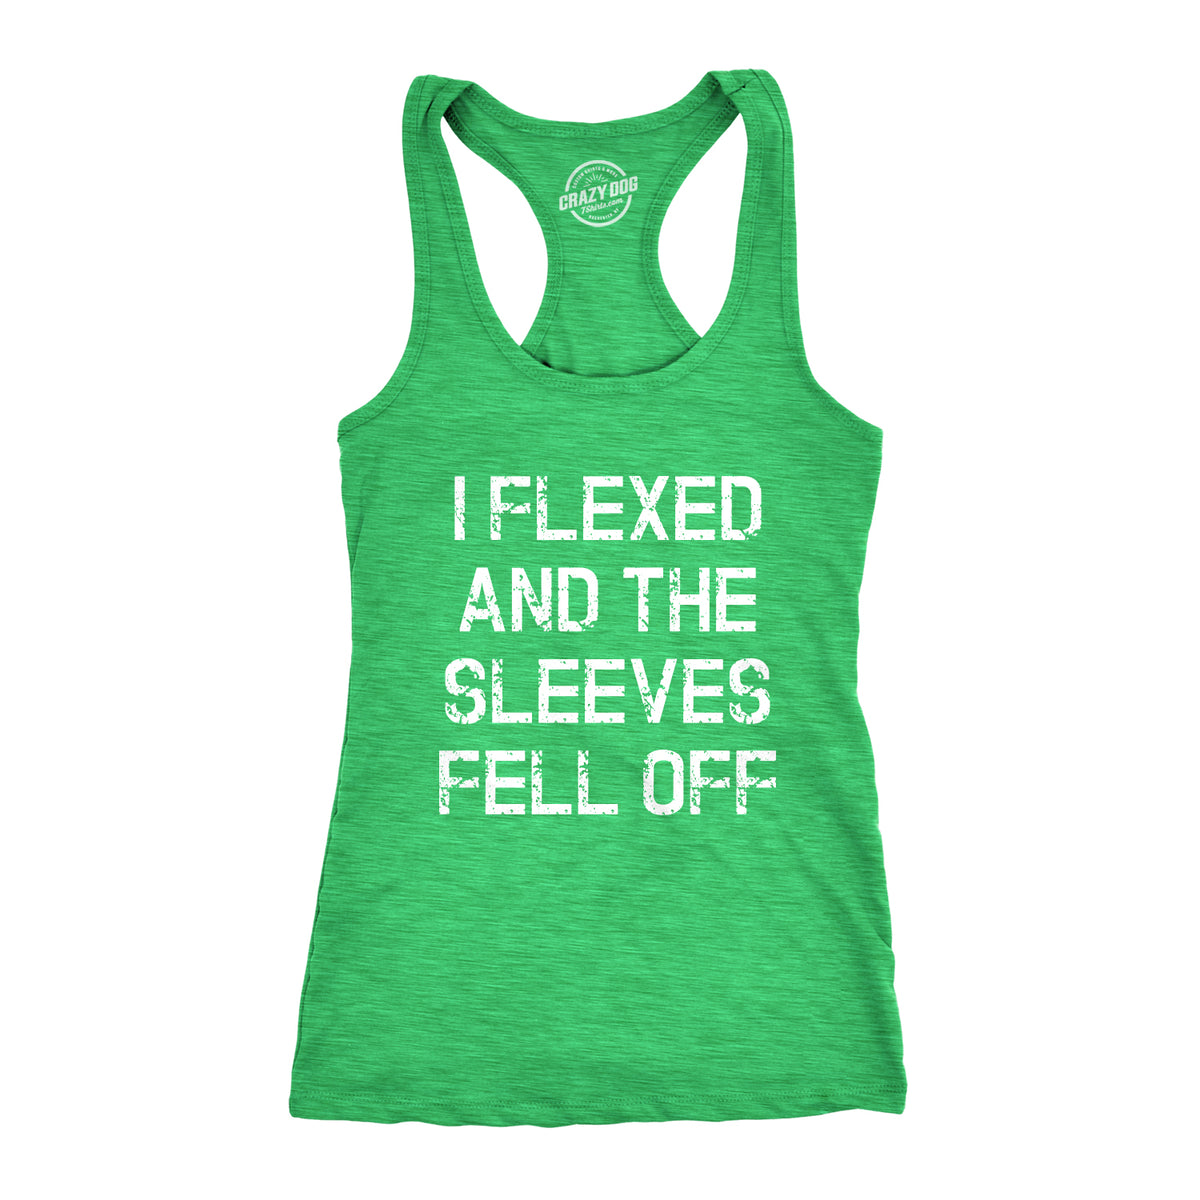 Funny Heather Green I Flexed And The Sleeves Fell Off Womens Tank Top Nerdy Fitness Tee